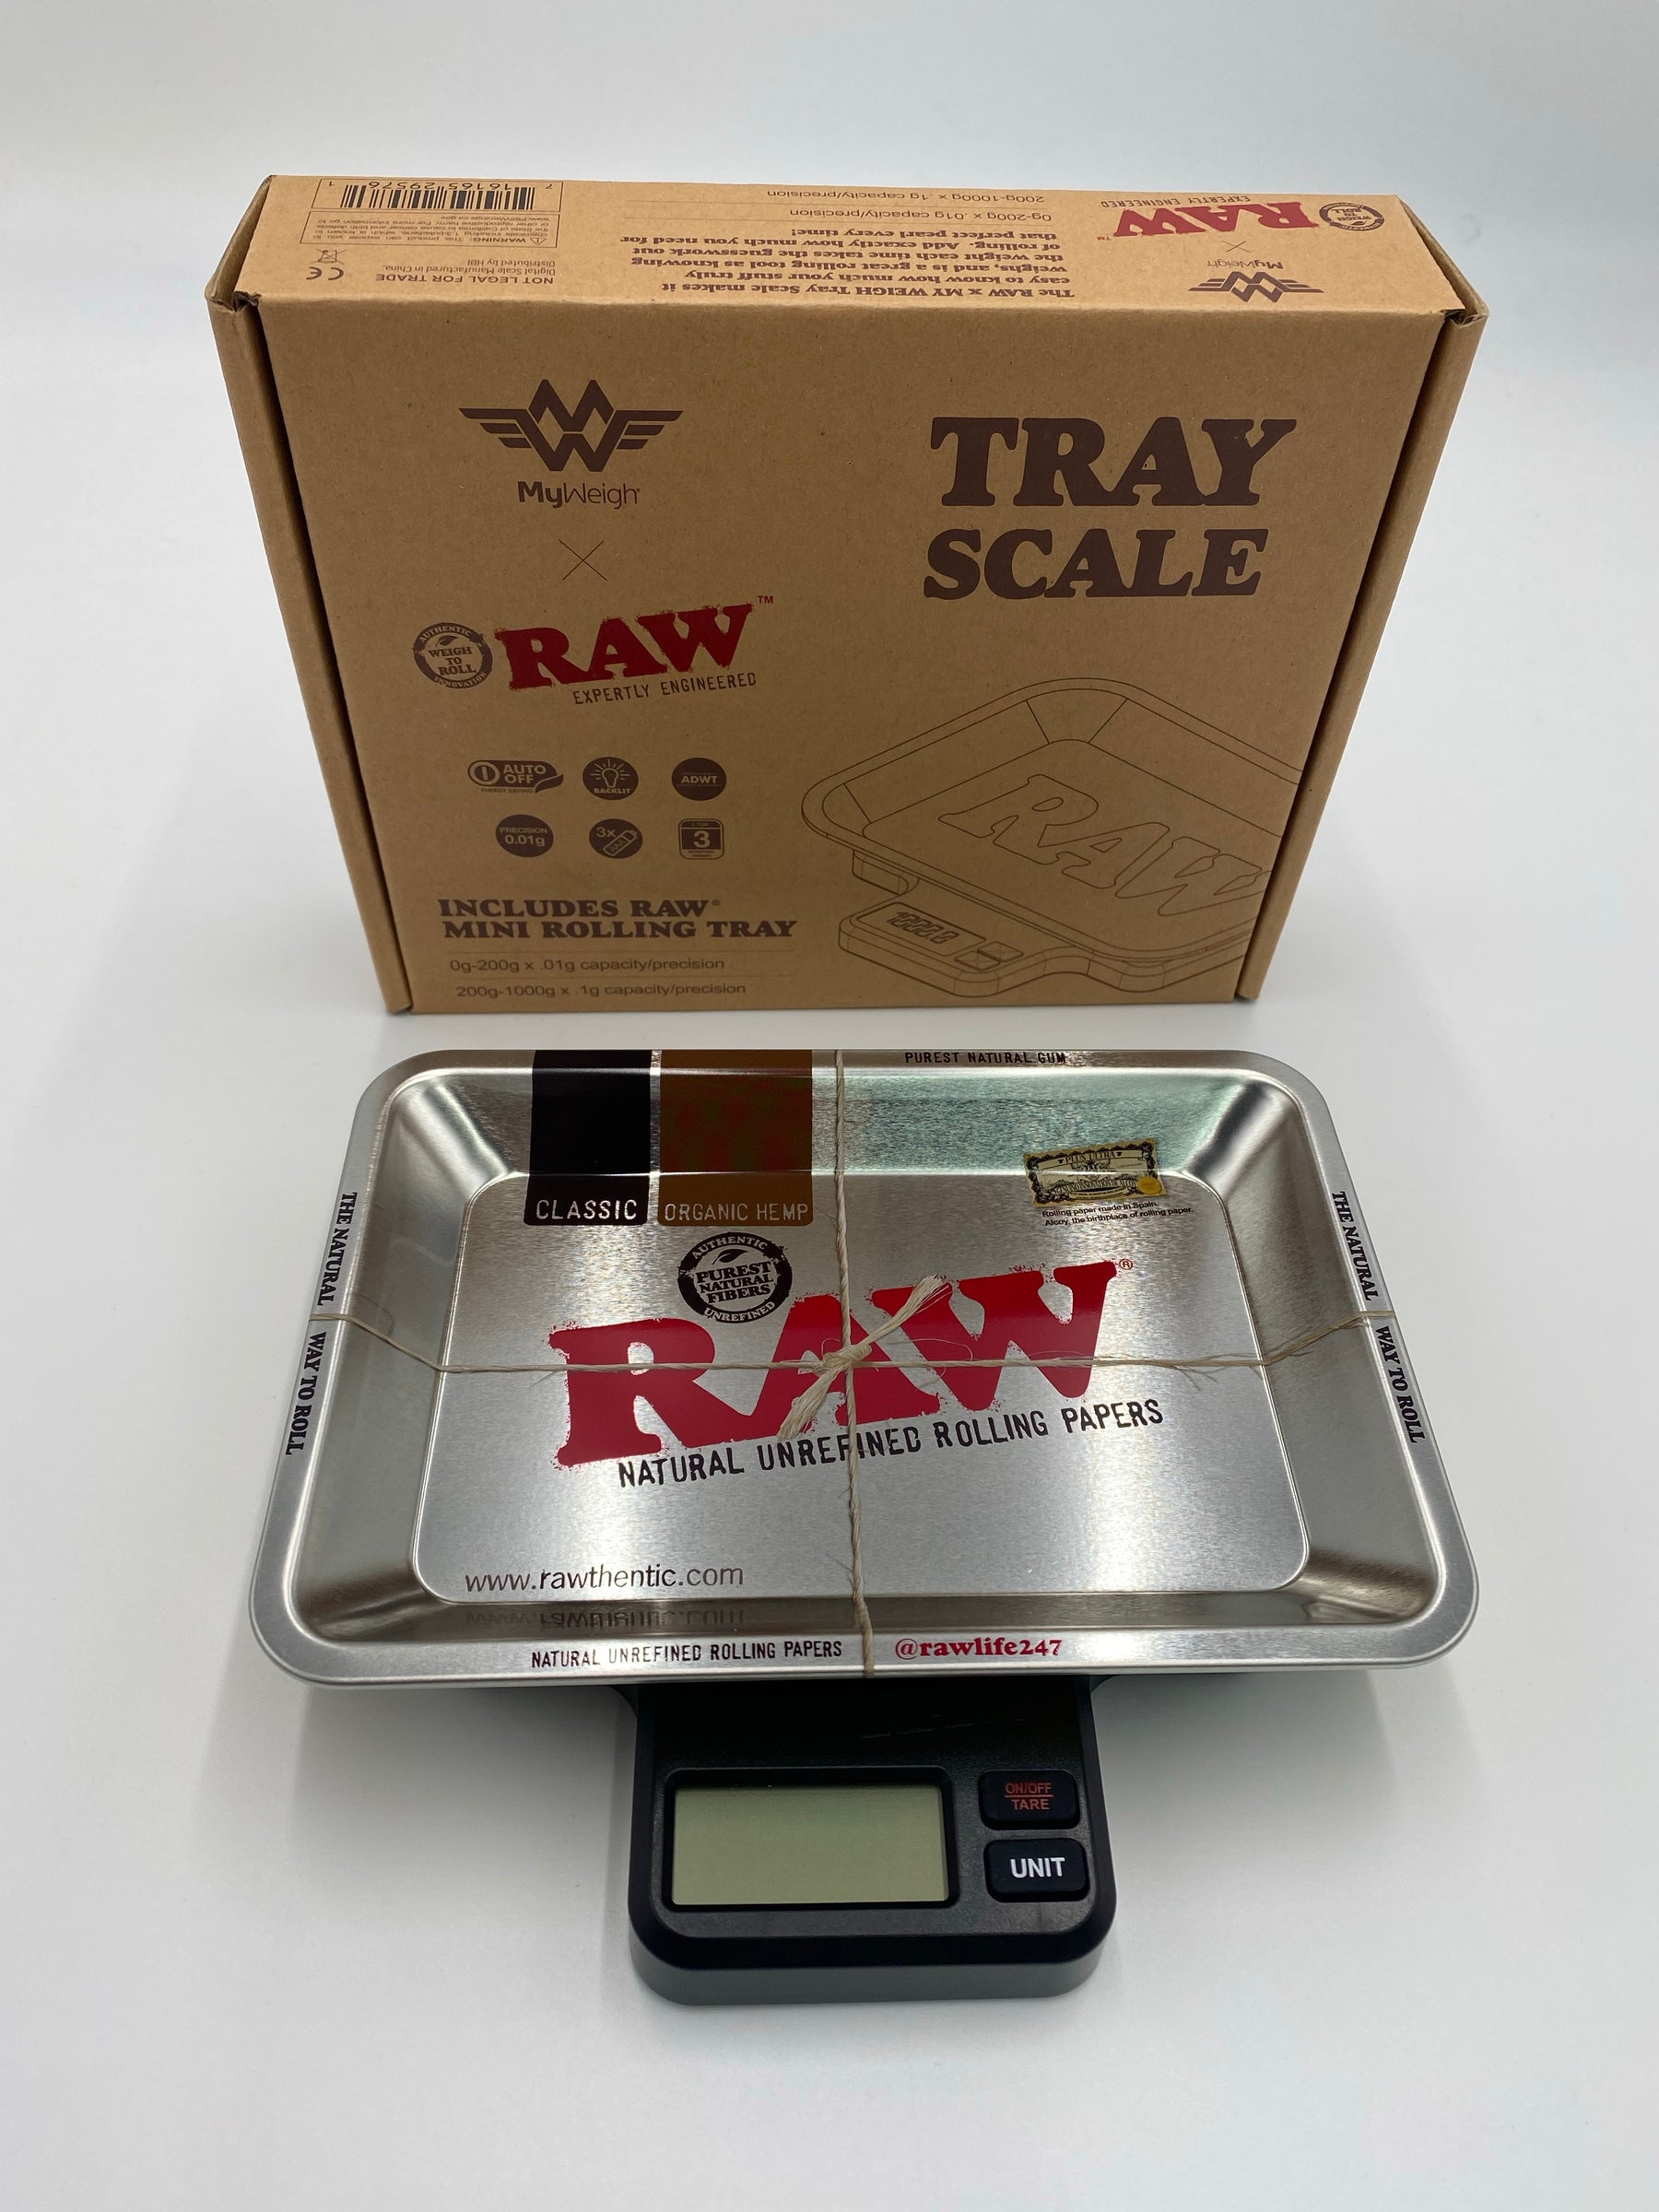 MY WEIGH X RAW TRAY SCALE ( INCLUDES RAW MINI ROLLING TRAY)